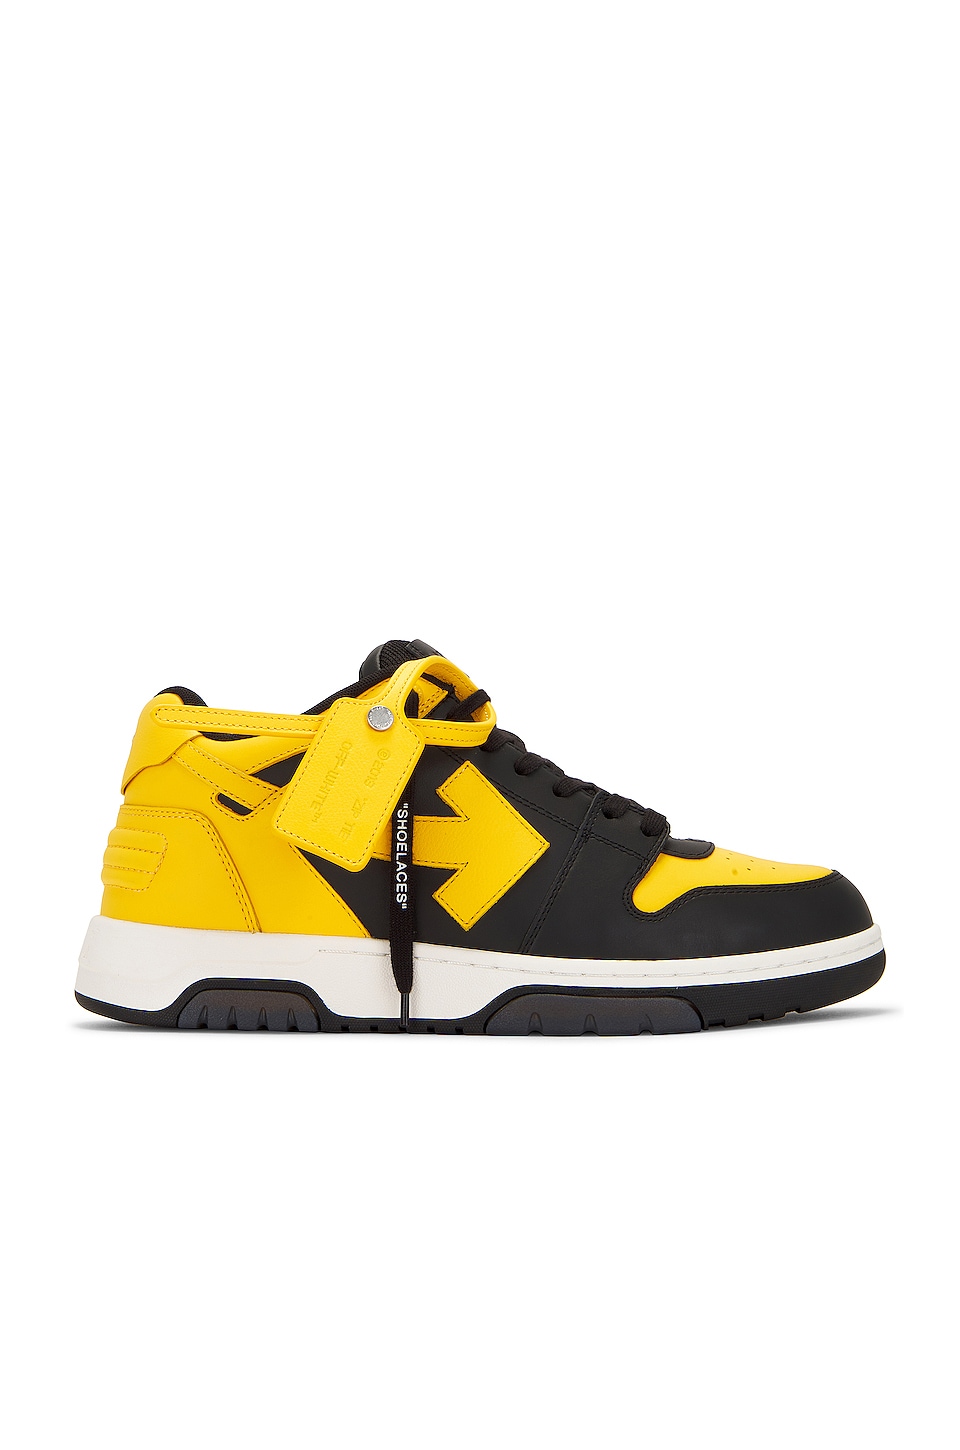 OFF-WHITE Out Of Office Sneakers in Black & Yellow | REVOLVE